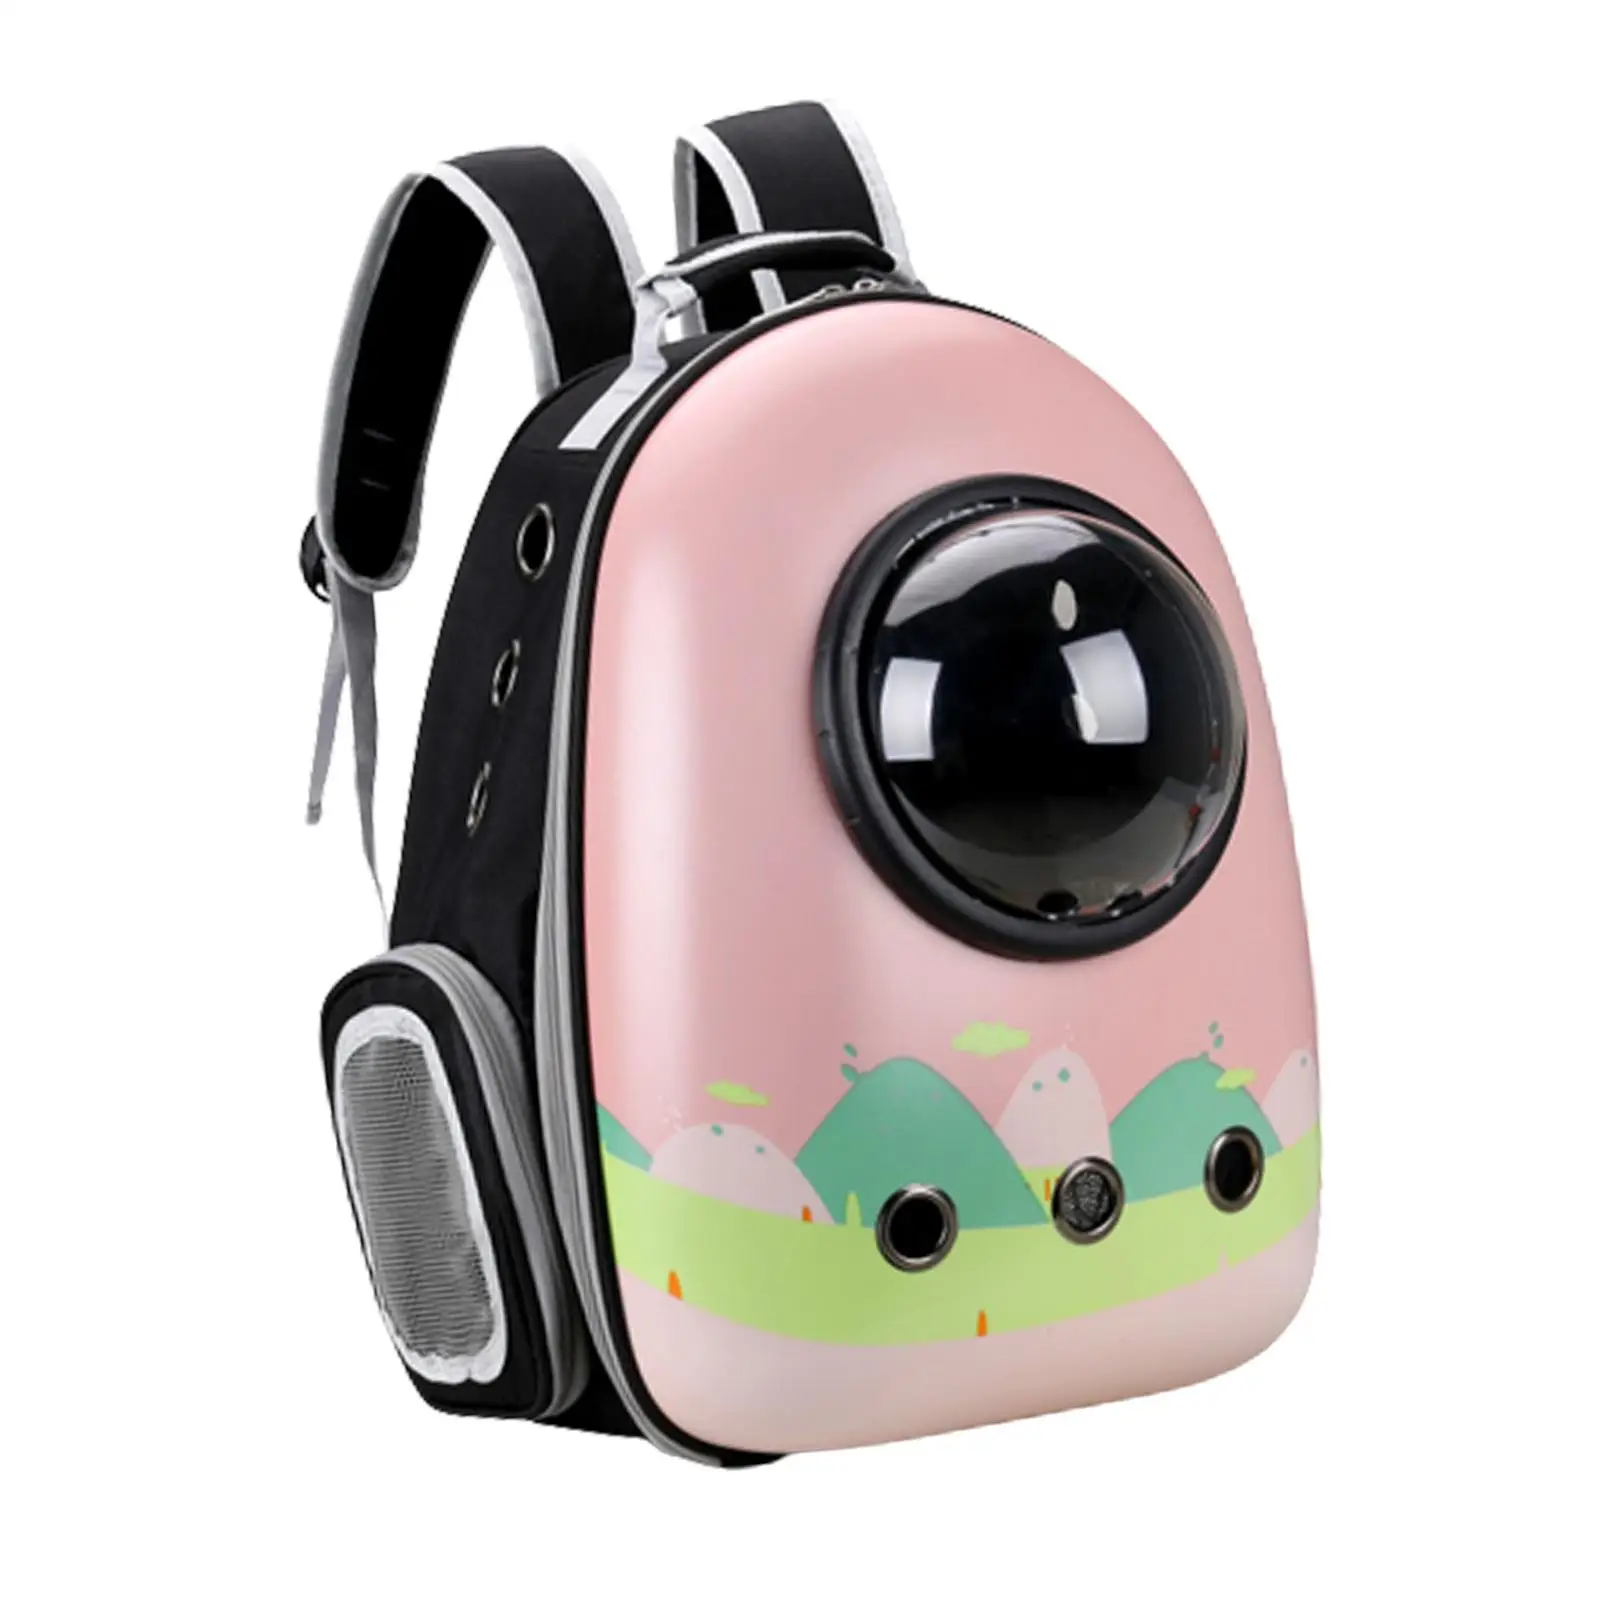 Cat Carrier Backpack Carrying Bag Ventilation Transparent Small Dogs Cats Travel Carrier for Hiking Outdoor Use Traveling